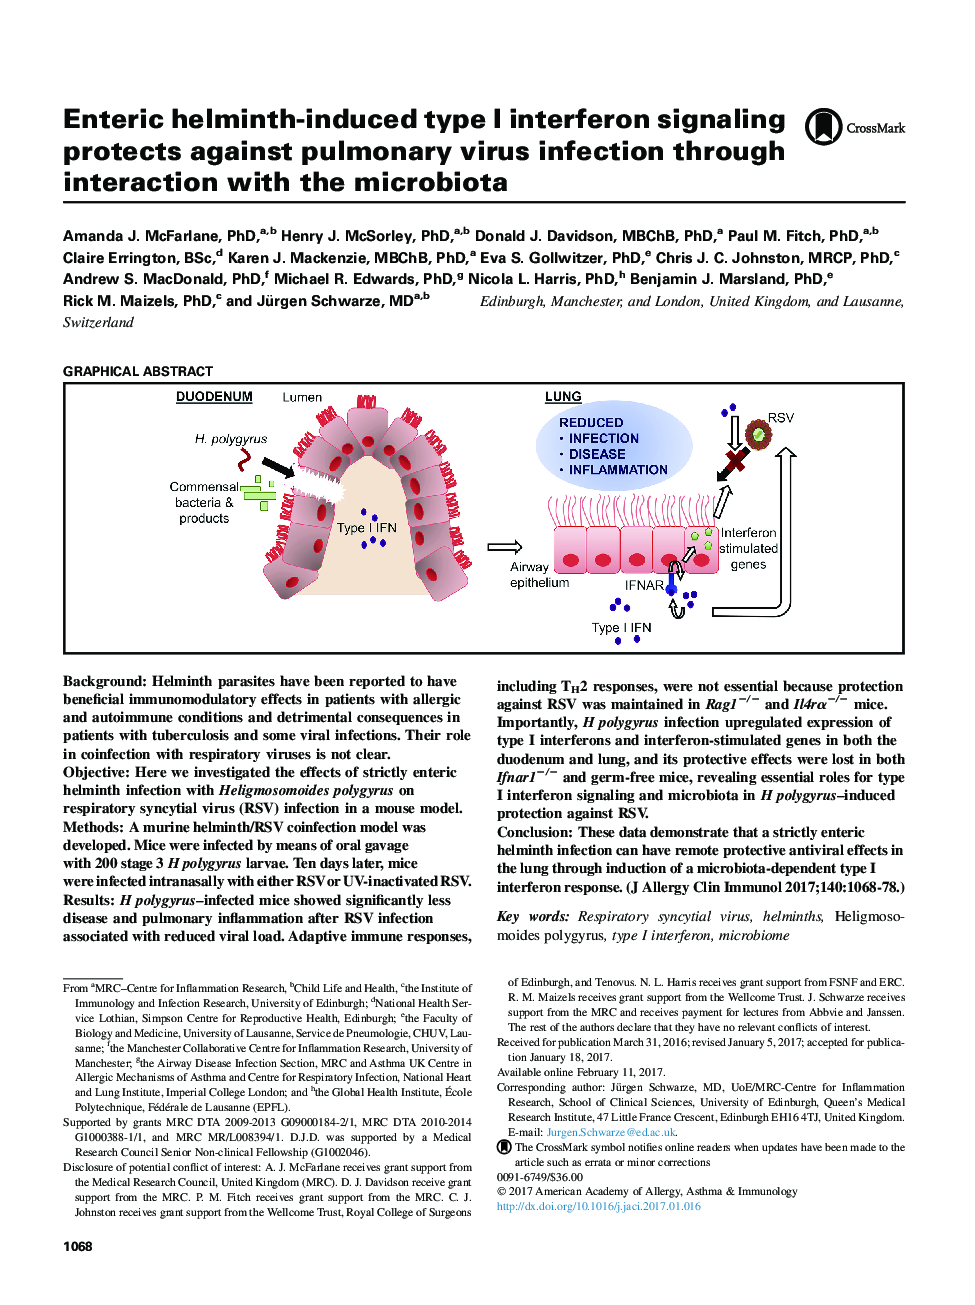 Enteric helminth-induced type I interferon signaling protects against pulmonary virus infection through interaction with the microbiota